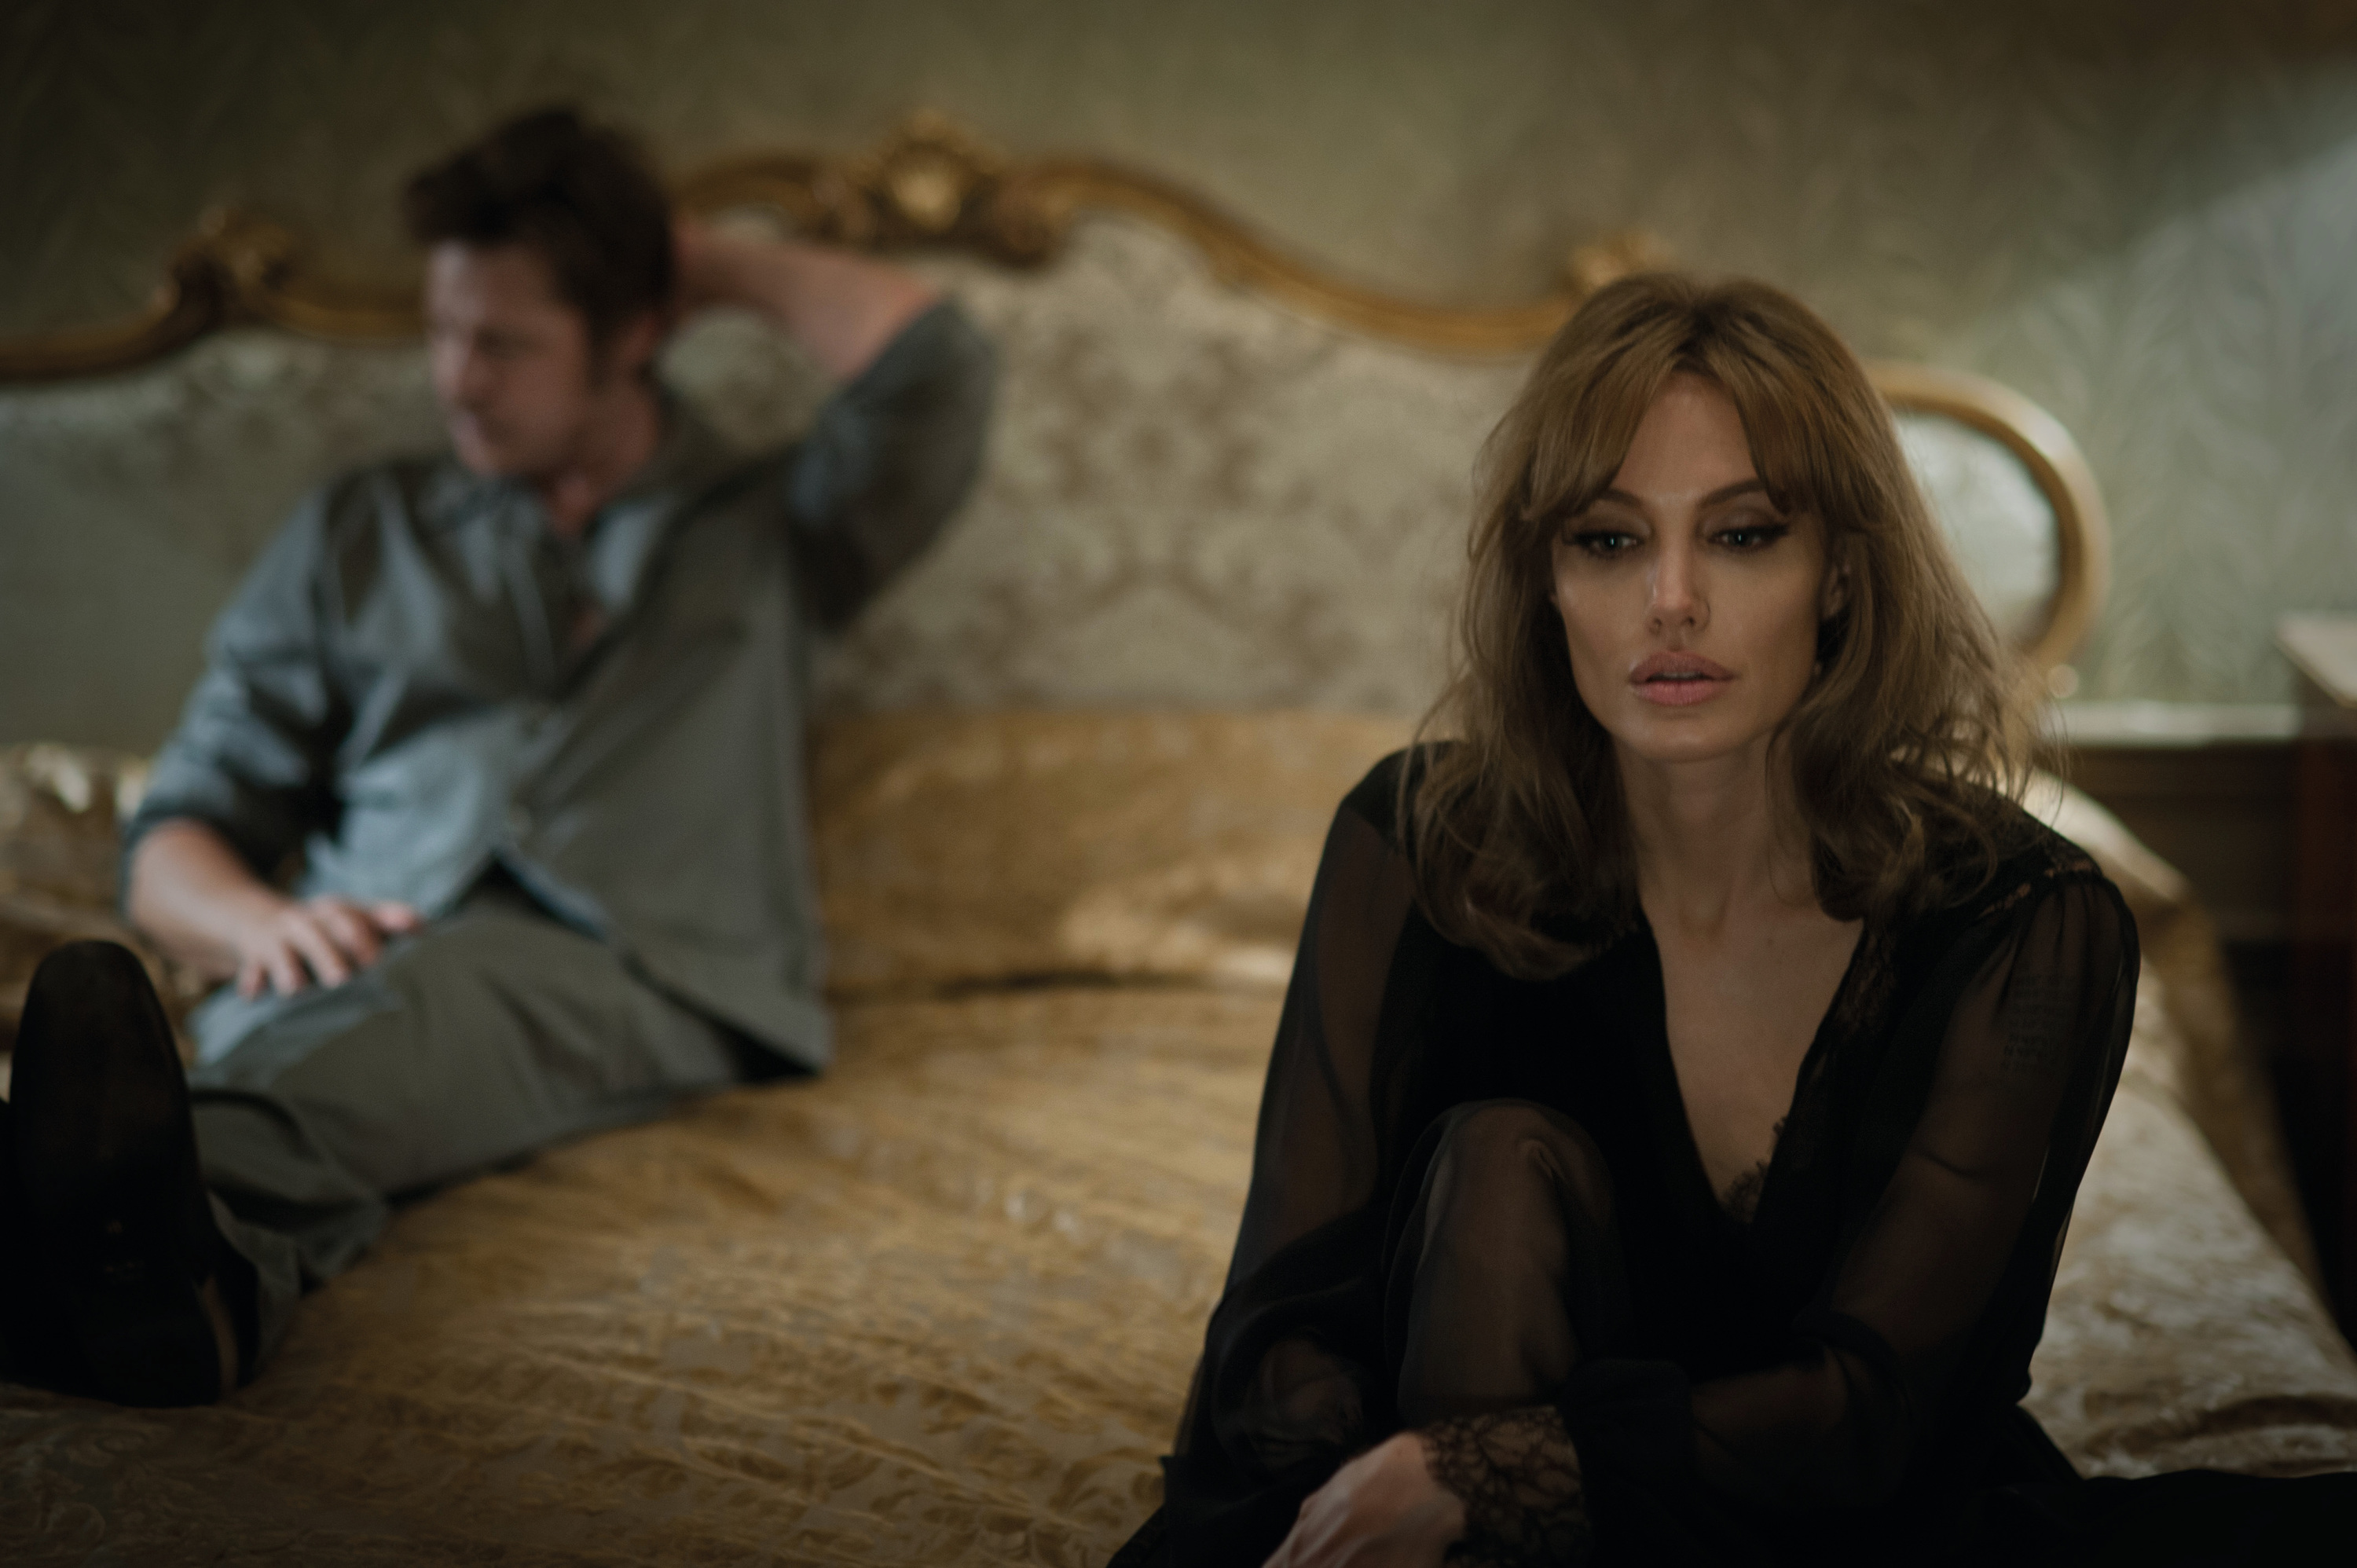 By the Sea 2015, directed by Angelina Jolie | Film review